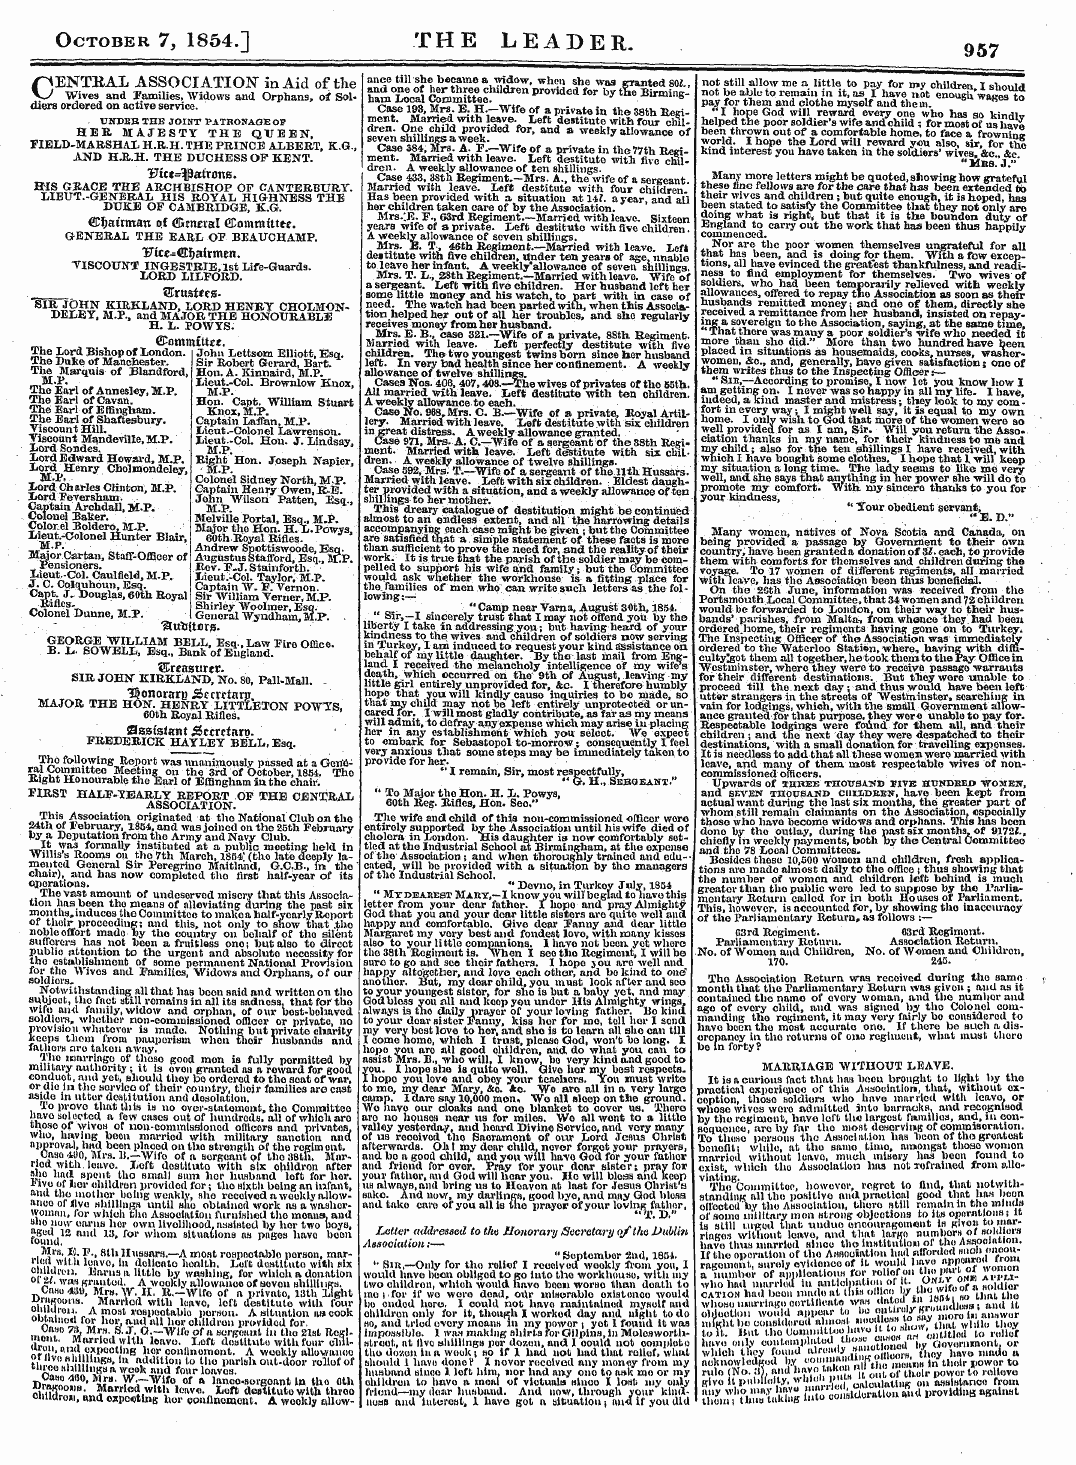 Leader (1850-1860): jS F Y, Country edition - October 7, 1854.] The Leader. 957